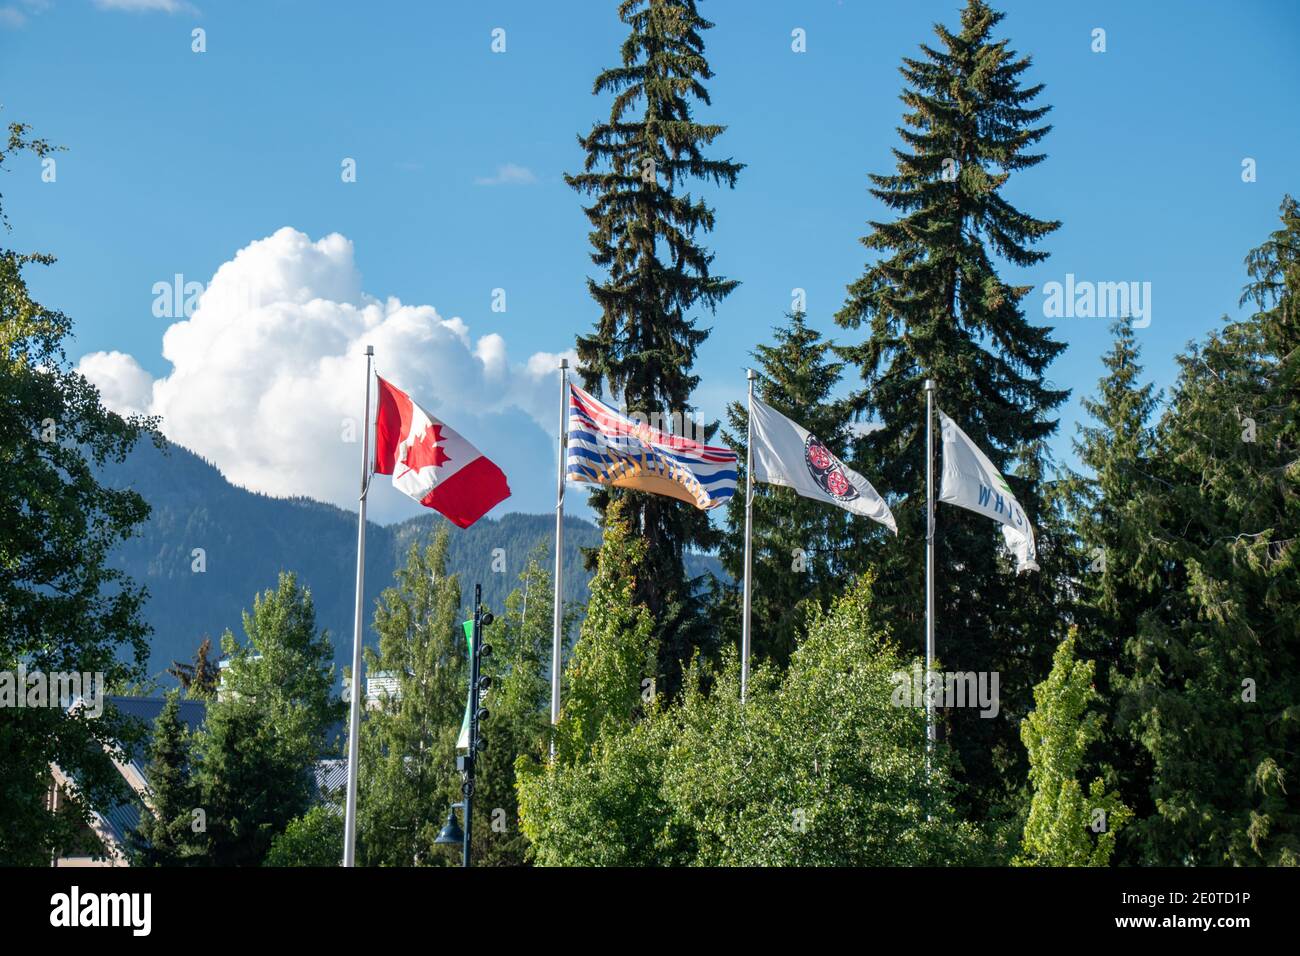 Whistler, Canada - July 5,2020: View of poles with waving flags in the Whistler Village Stock Photo